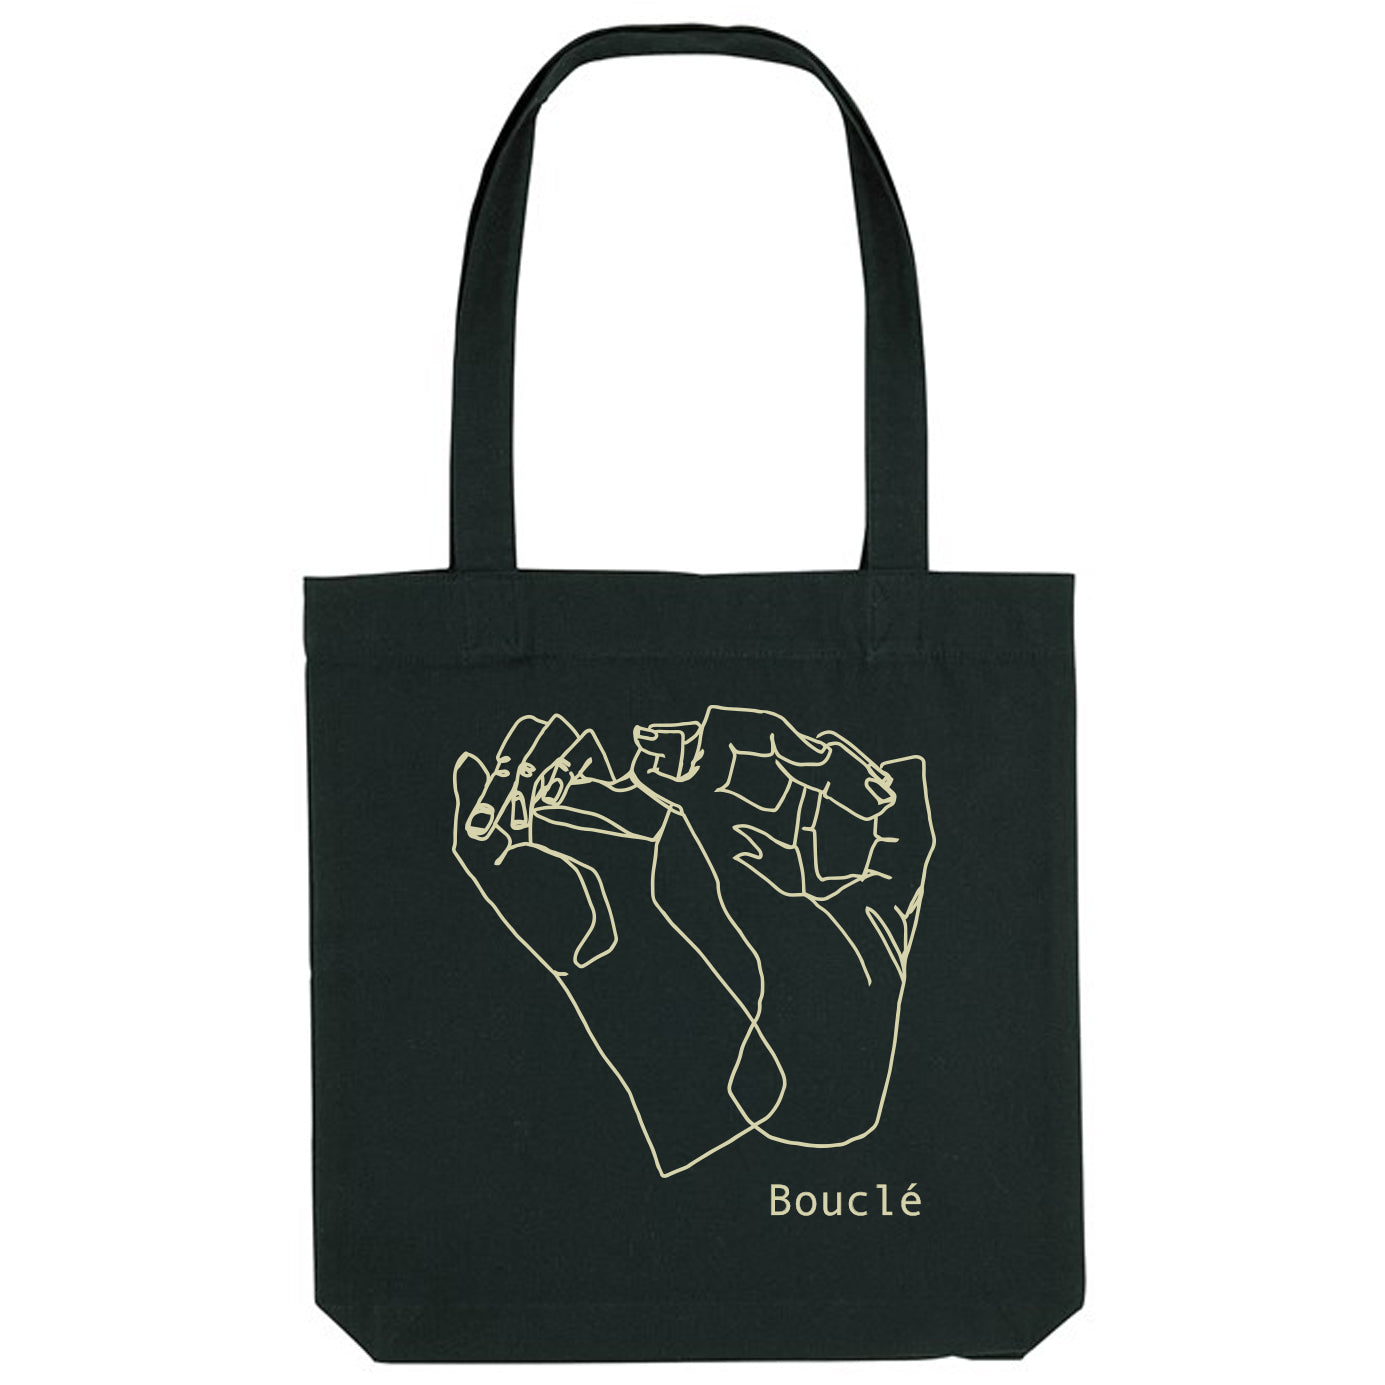 Black Recycled Woven Shopper Bag with Cream Interlinked Hands Screenprint